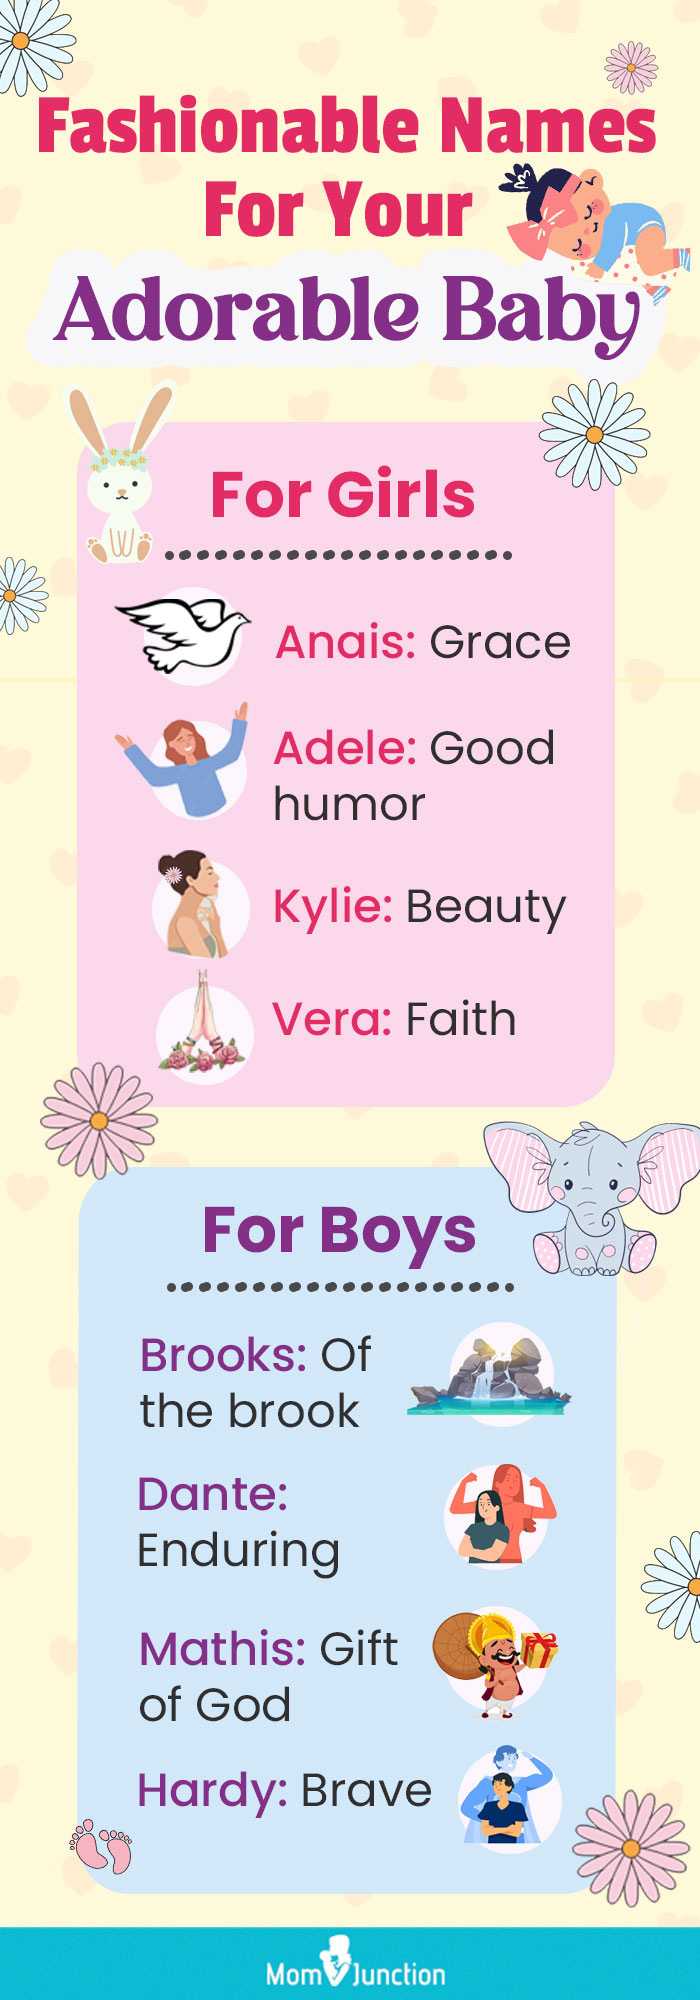 fashionable names for your adorable baby [infographic]